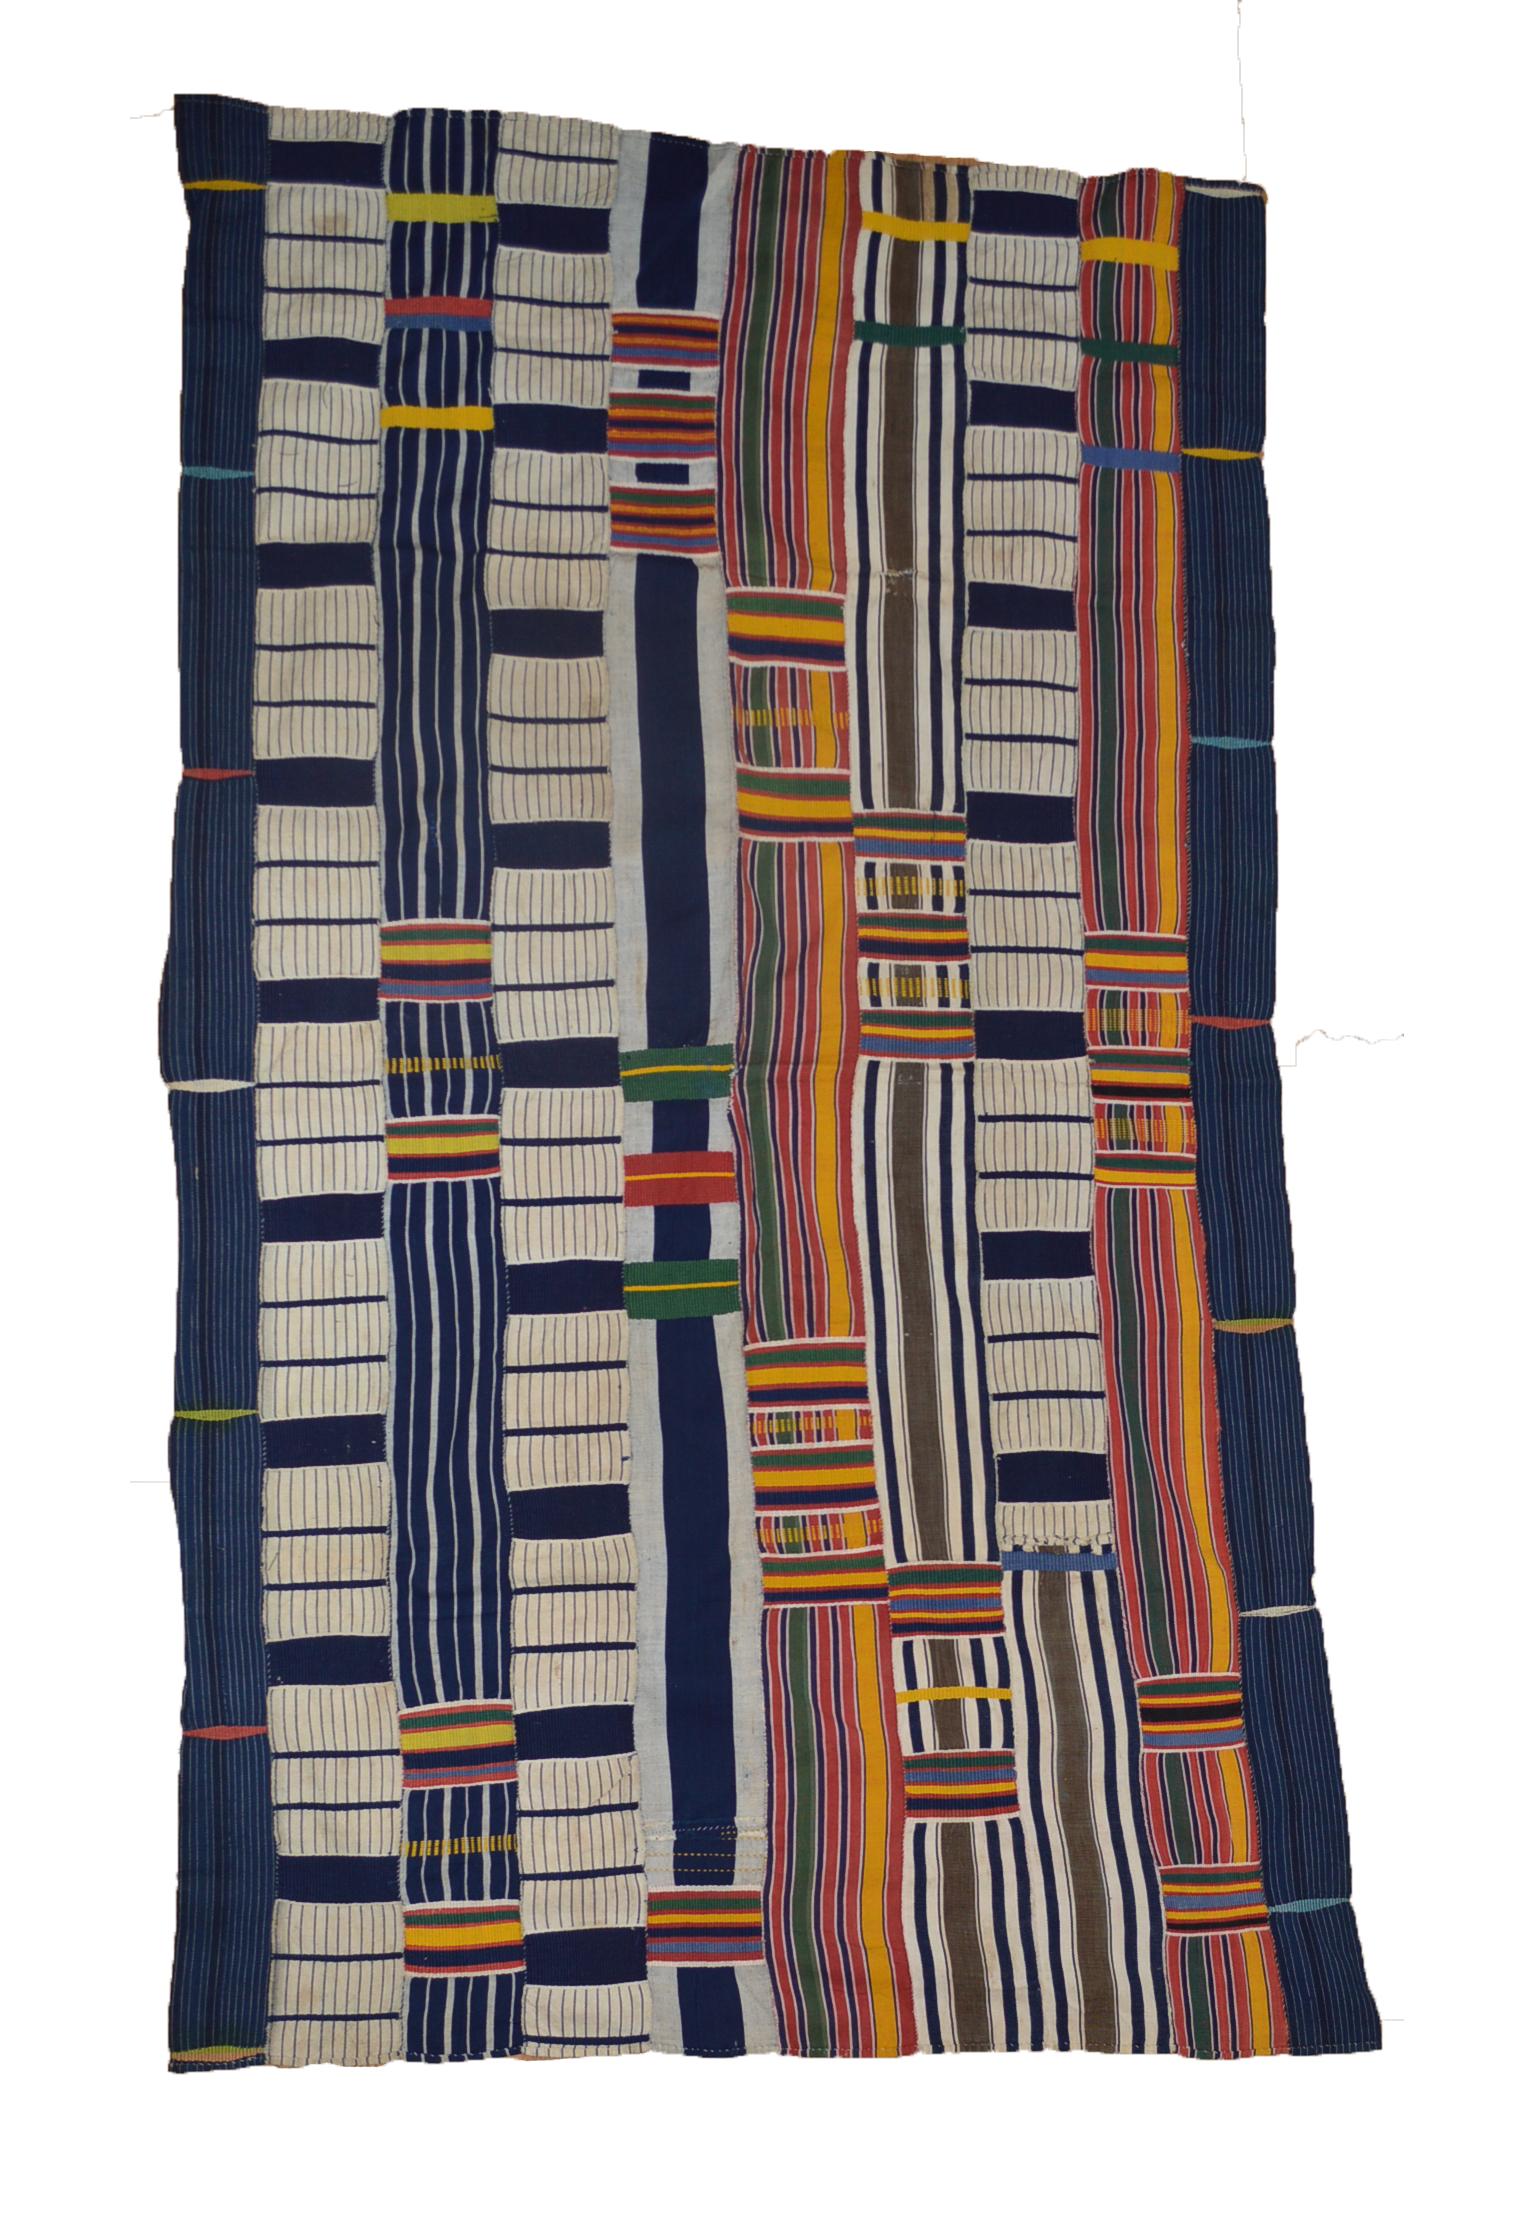 Ewe Kente cloth Ghana Togo
The small fine kente cloth made from sections of strips of material made on a strip loom
This kente cloth would have been made for a young girl who would have acted as the Royal escort
at an important event and uses colors